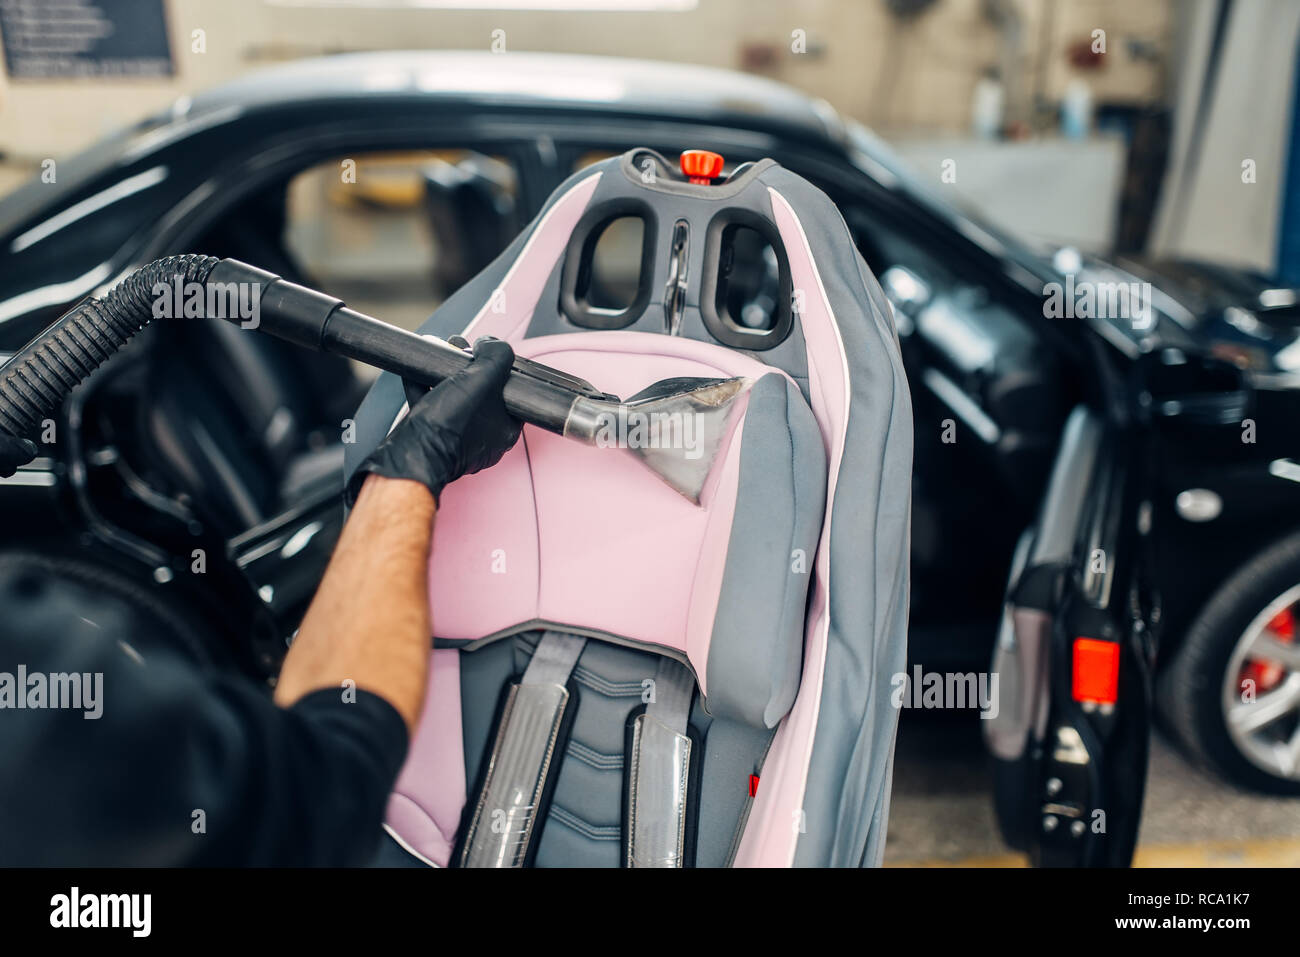 Carwash, Worker Cleans Salon with Steam Cleaner Stock Image